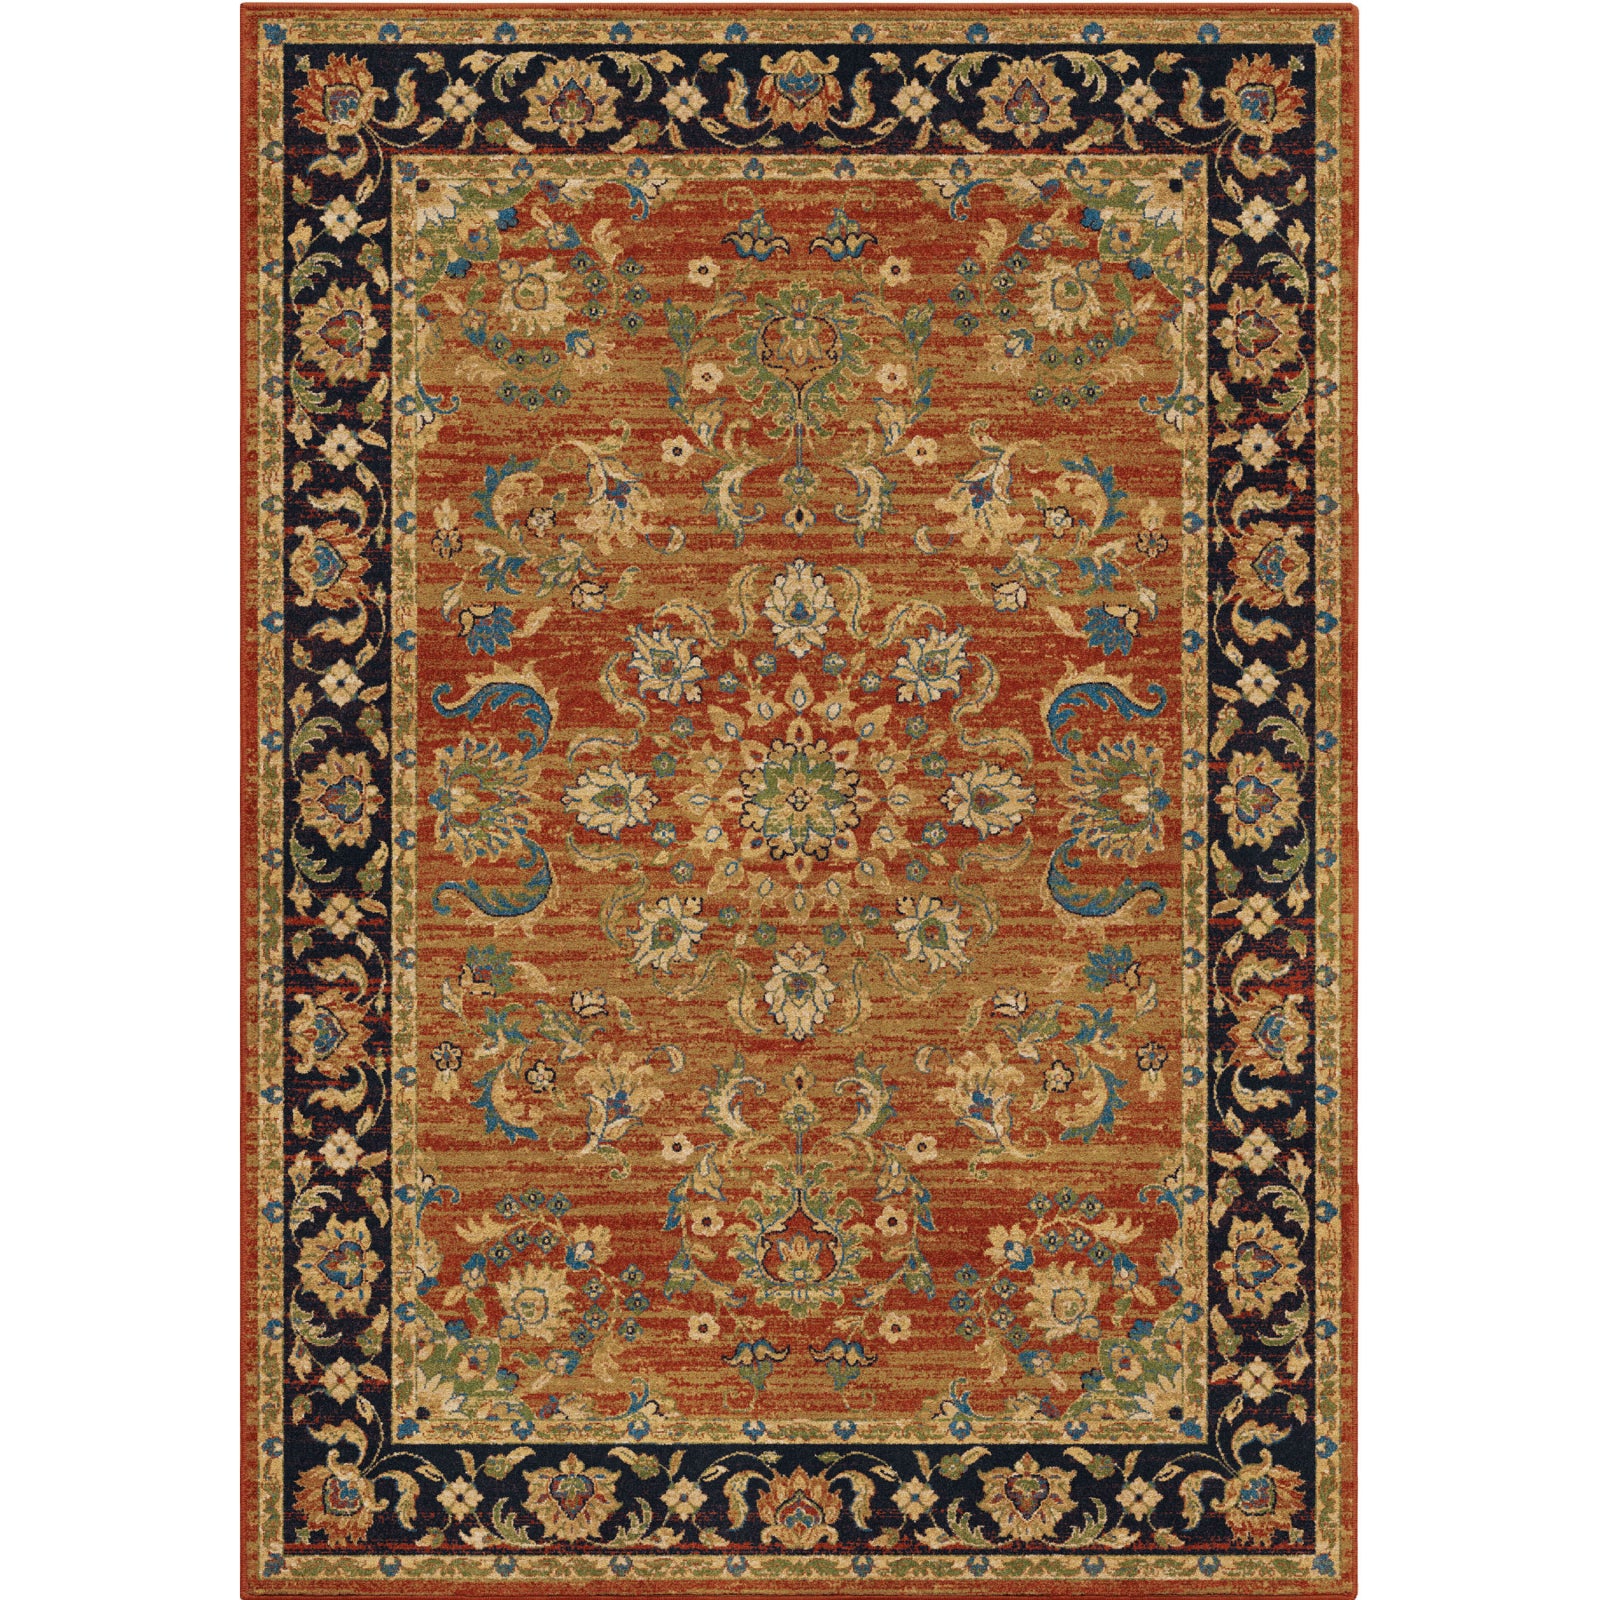 Orian Rugs Berkley Twisted Tradition Red Area Rug main image